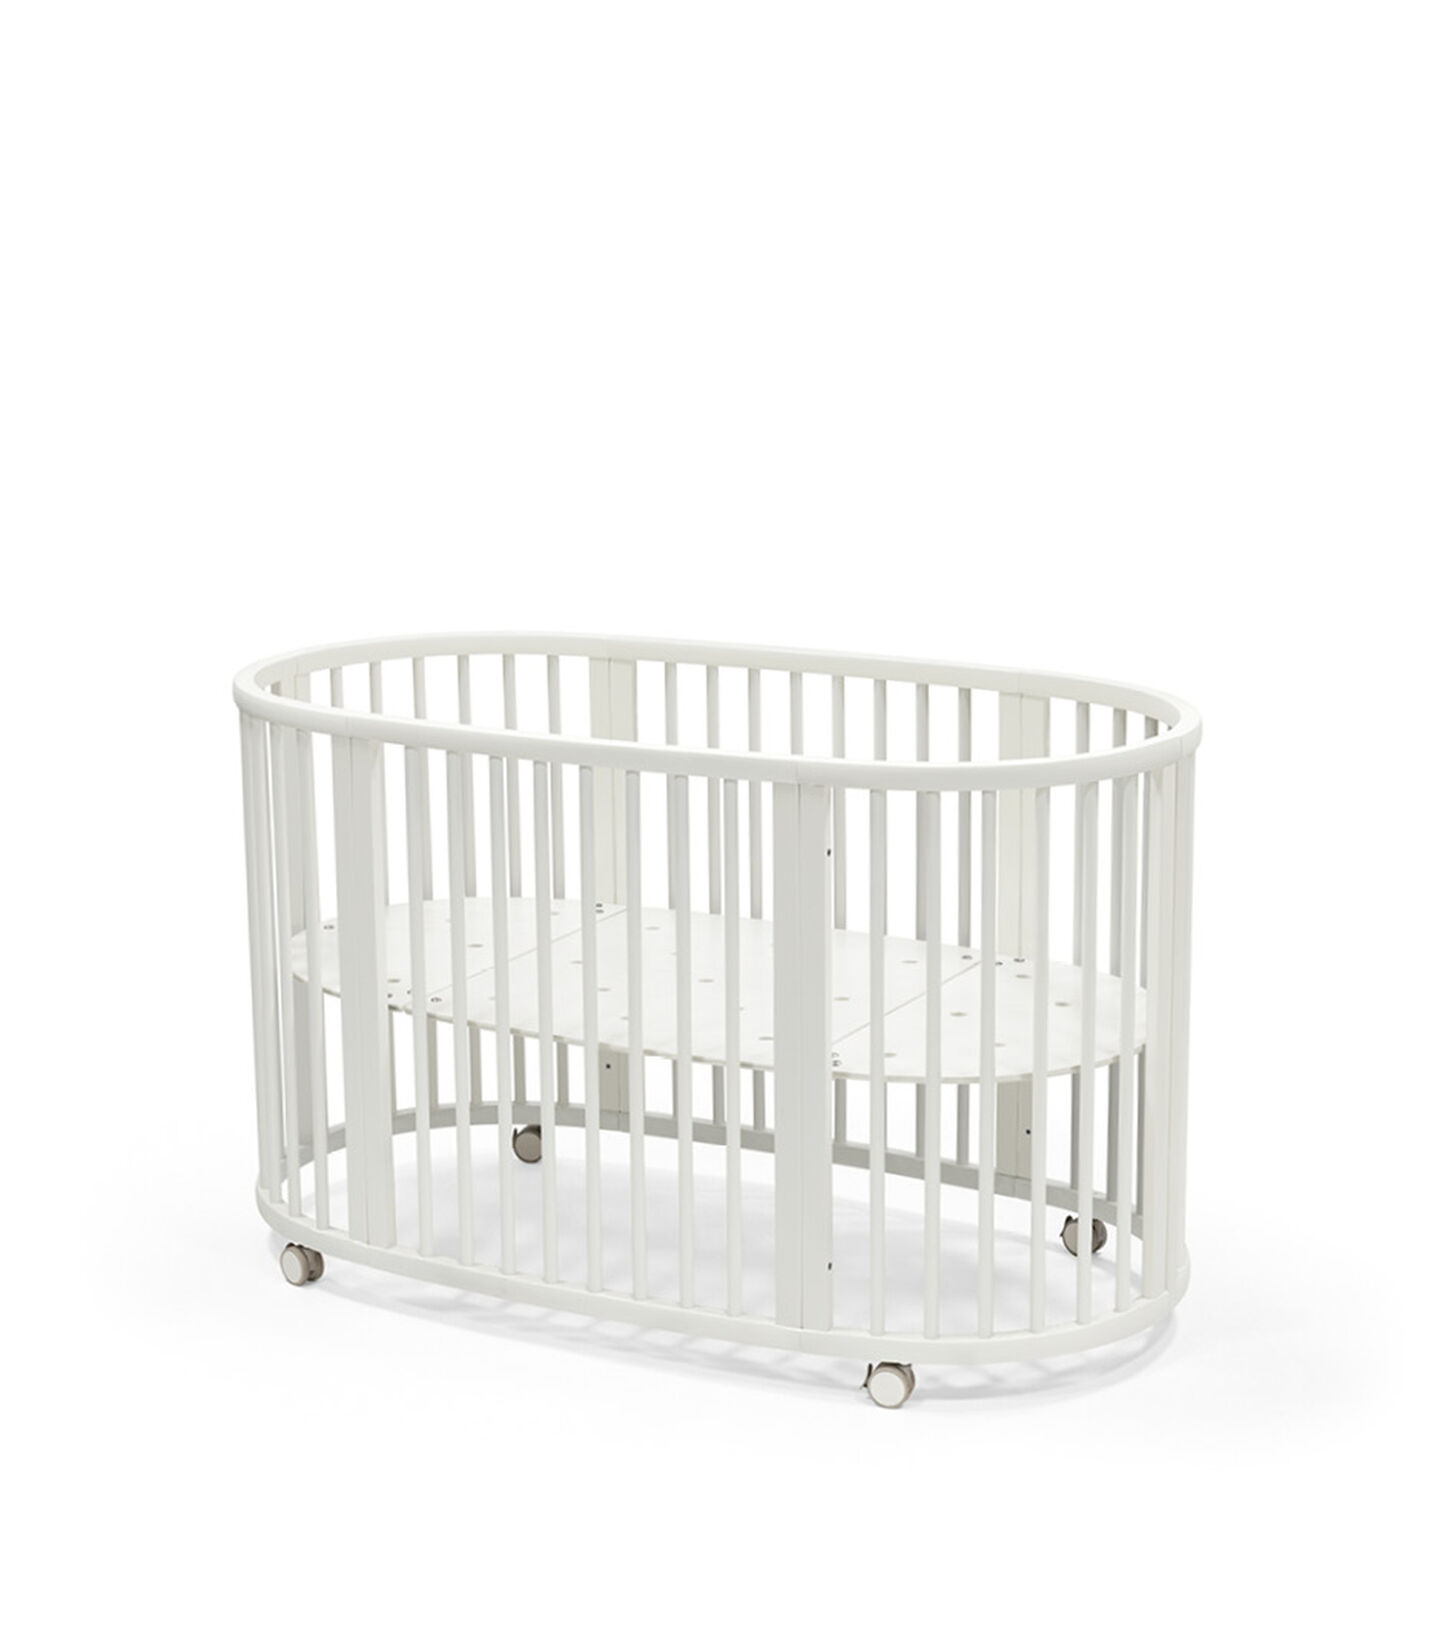 Stokke® Sleepi™ bed White, Wit, mainview view 1